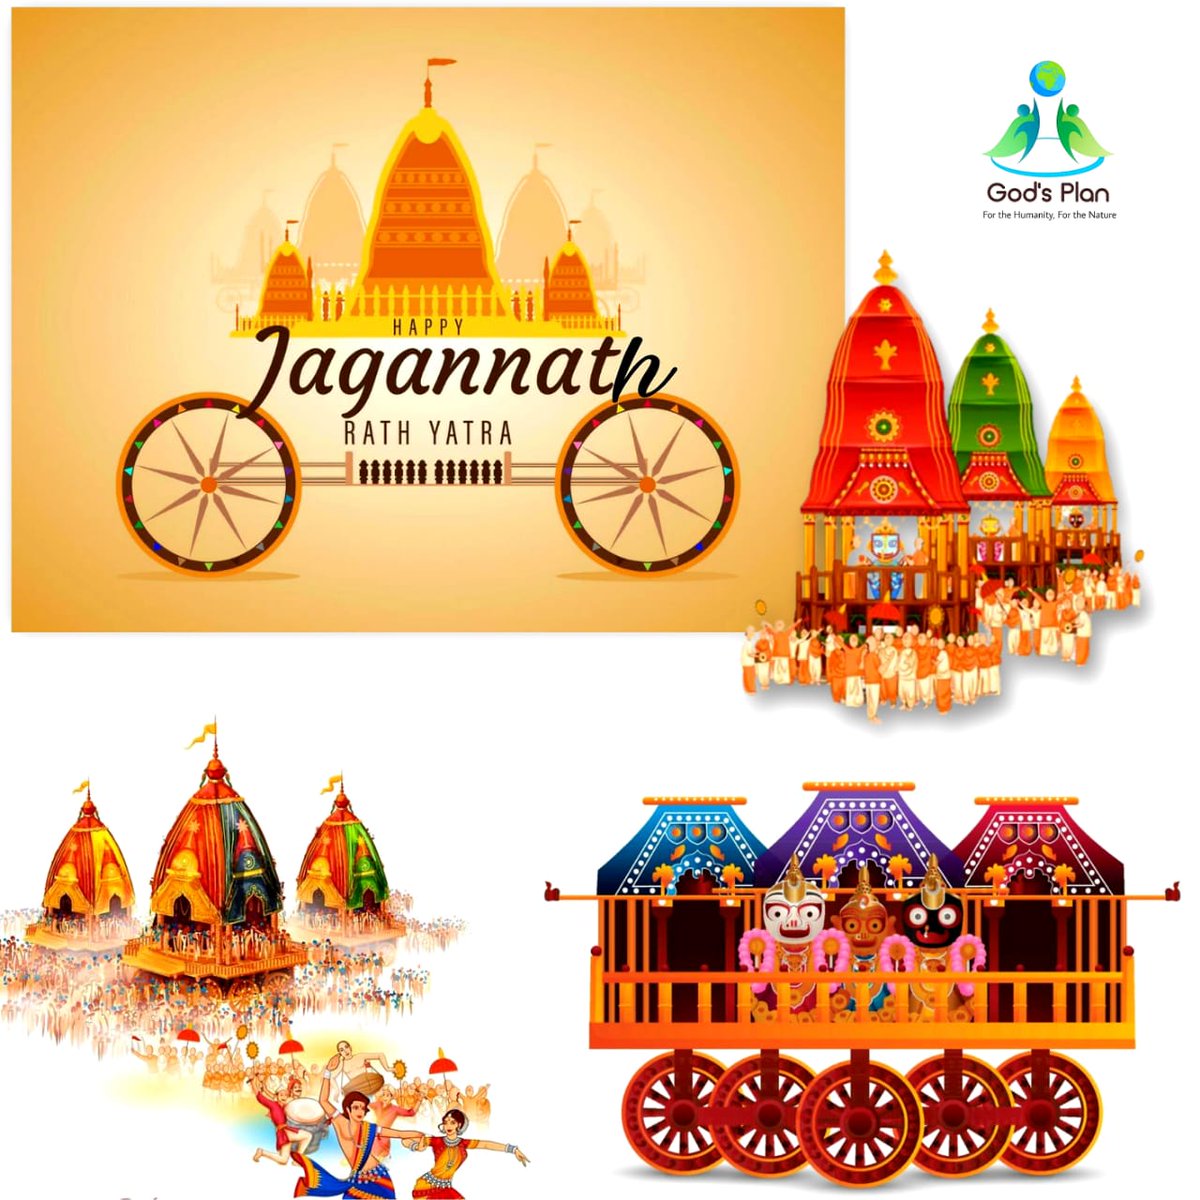 May Lord Jagannath's blessings bring joy, peace, and prosperity to your life. #HappyRathYatra 🌼